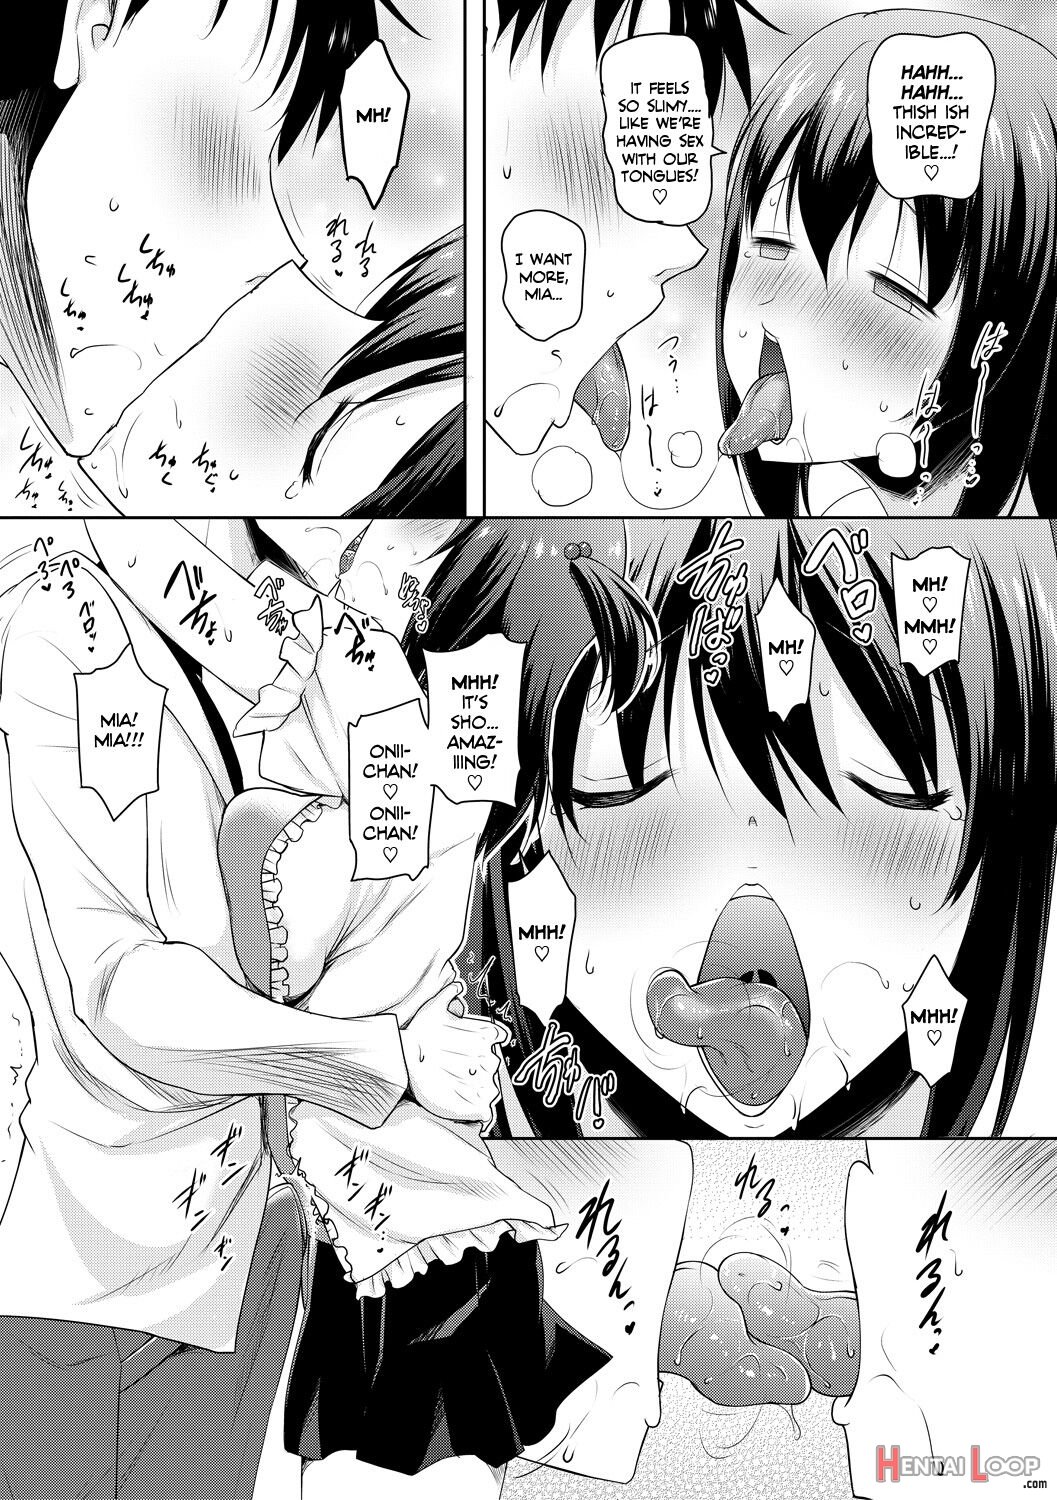 I Can't Live Without My Little Sister's Tongue Chapter 01-02 + Secret Baby-making Sex With A Big-titted Mother And Daughter! page 13